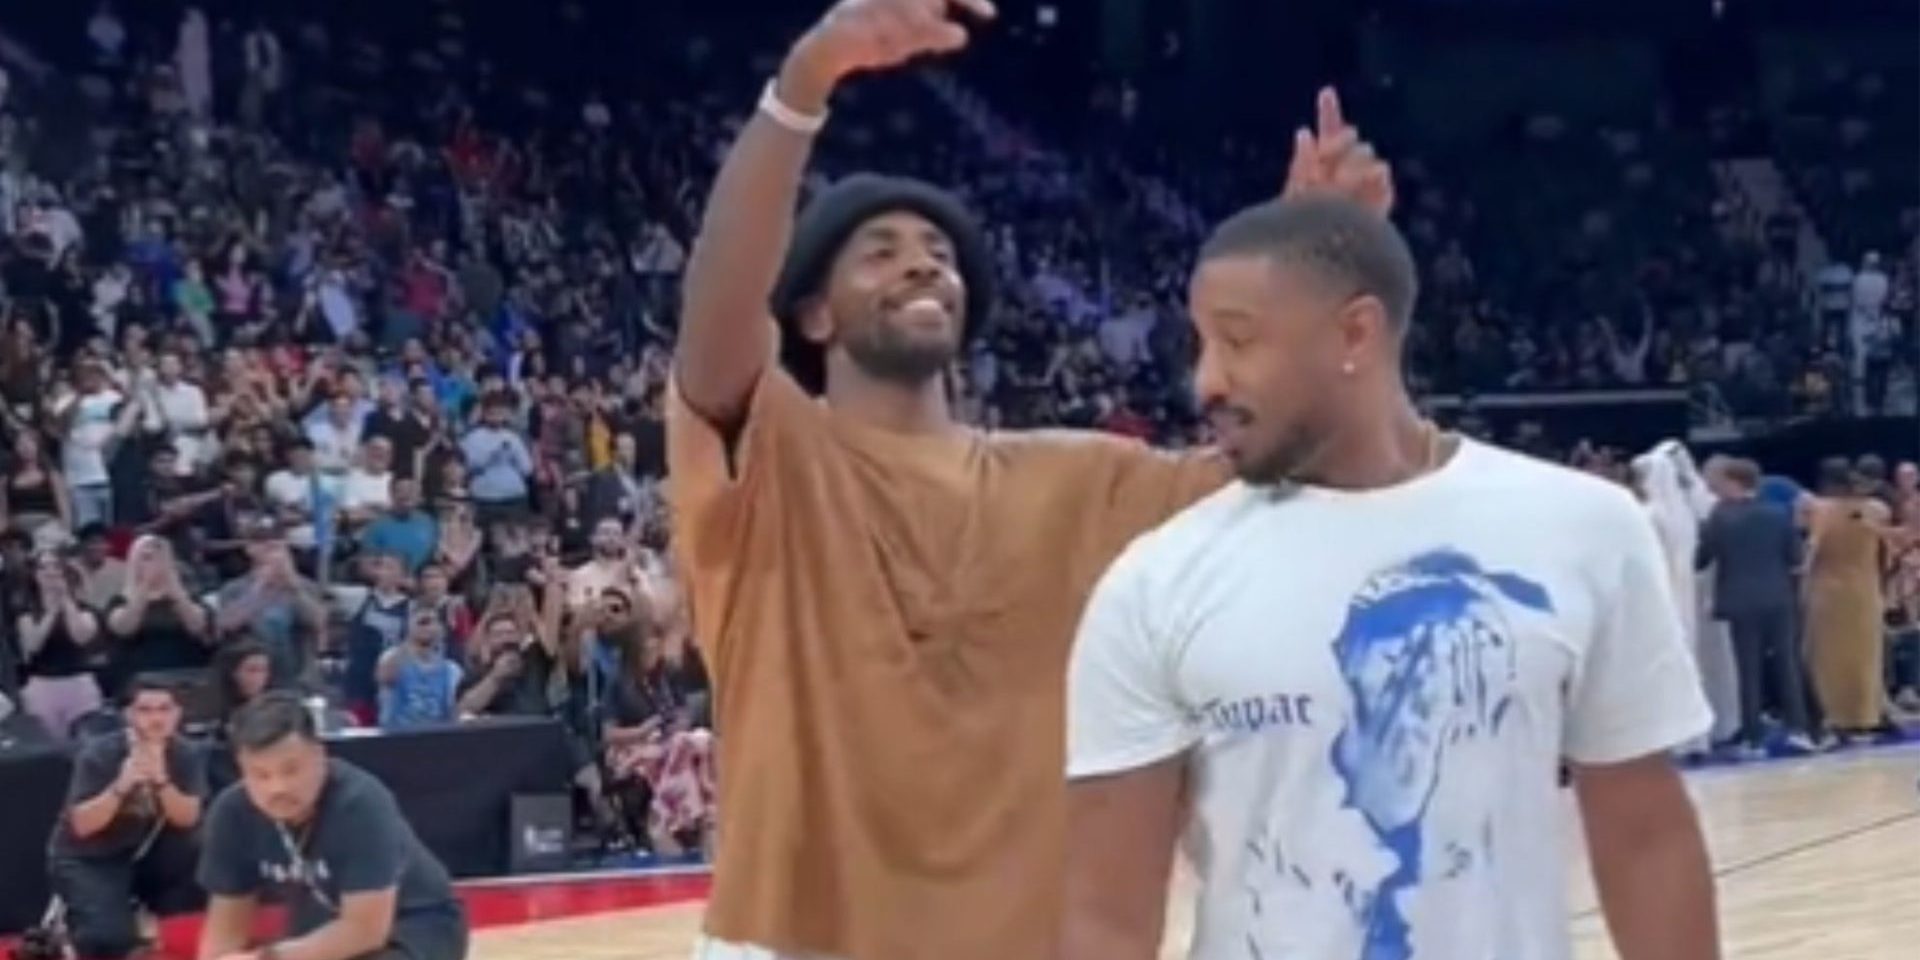 Kyrie Irving loses shooting competition to actor Michael B. Jordan in Abu Dhabi